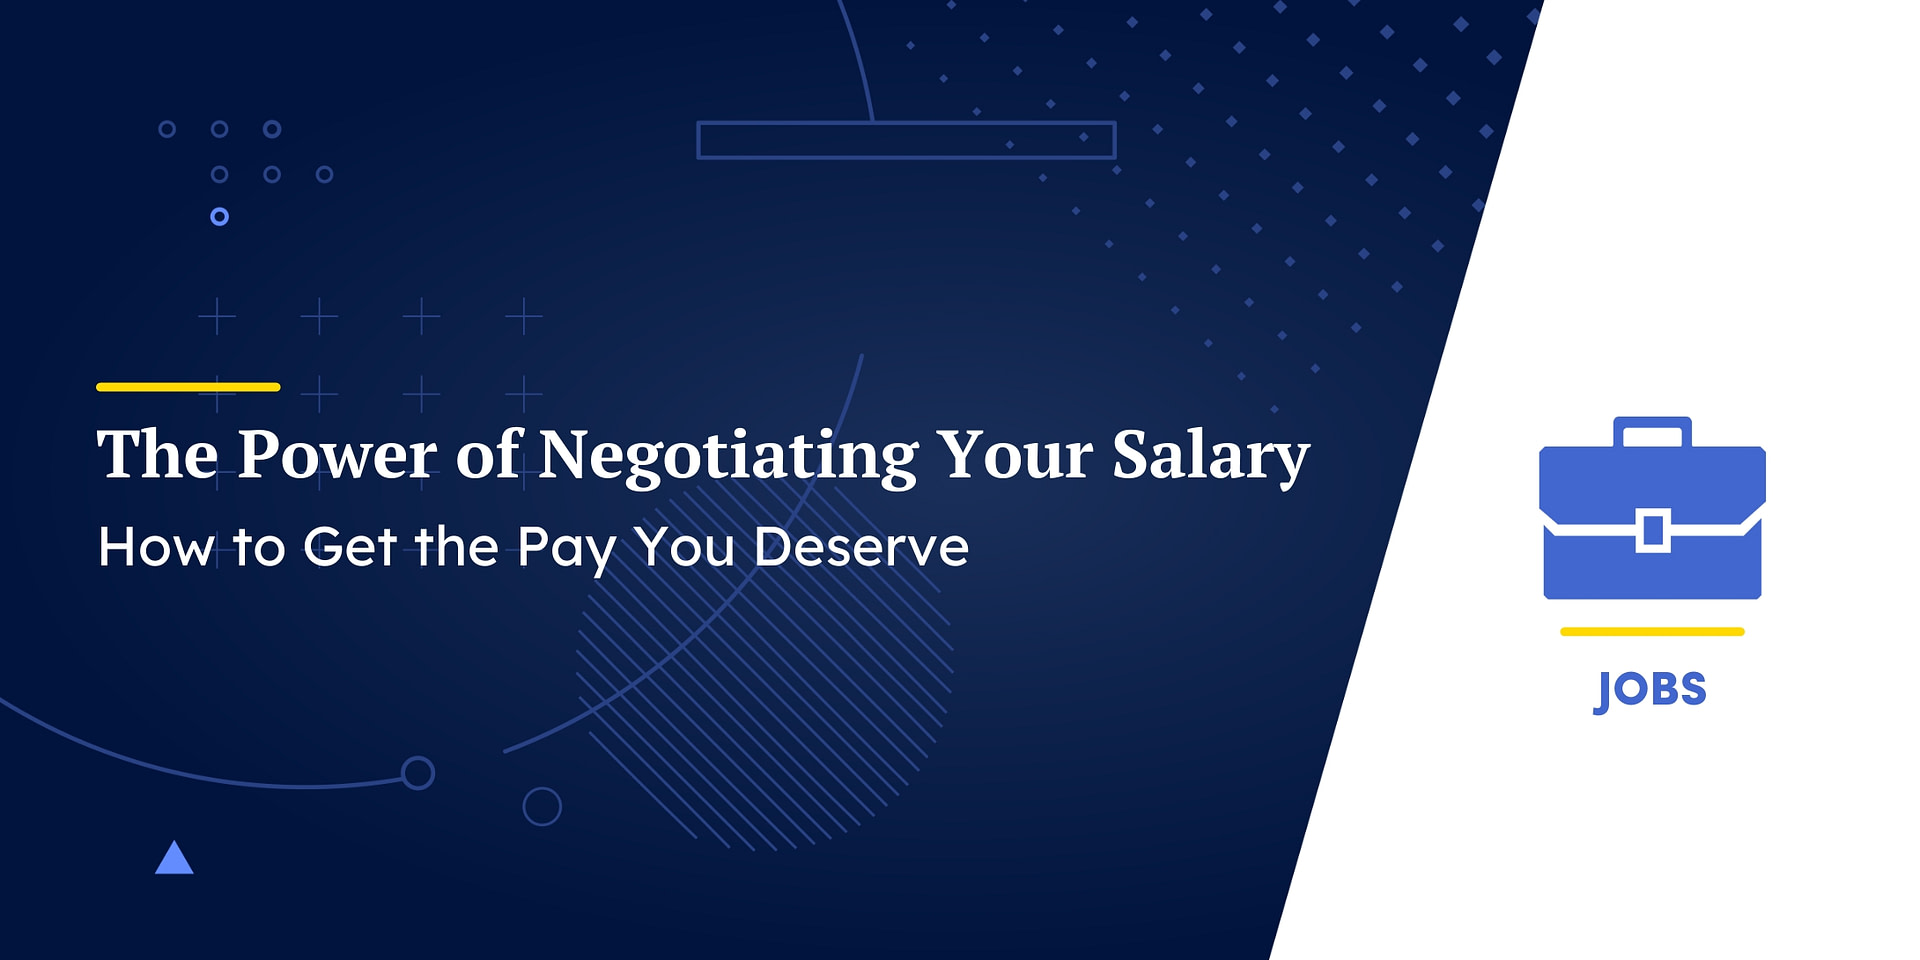 Tips on how to Get the Pay You Deserve